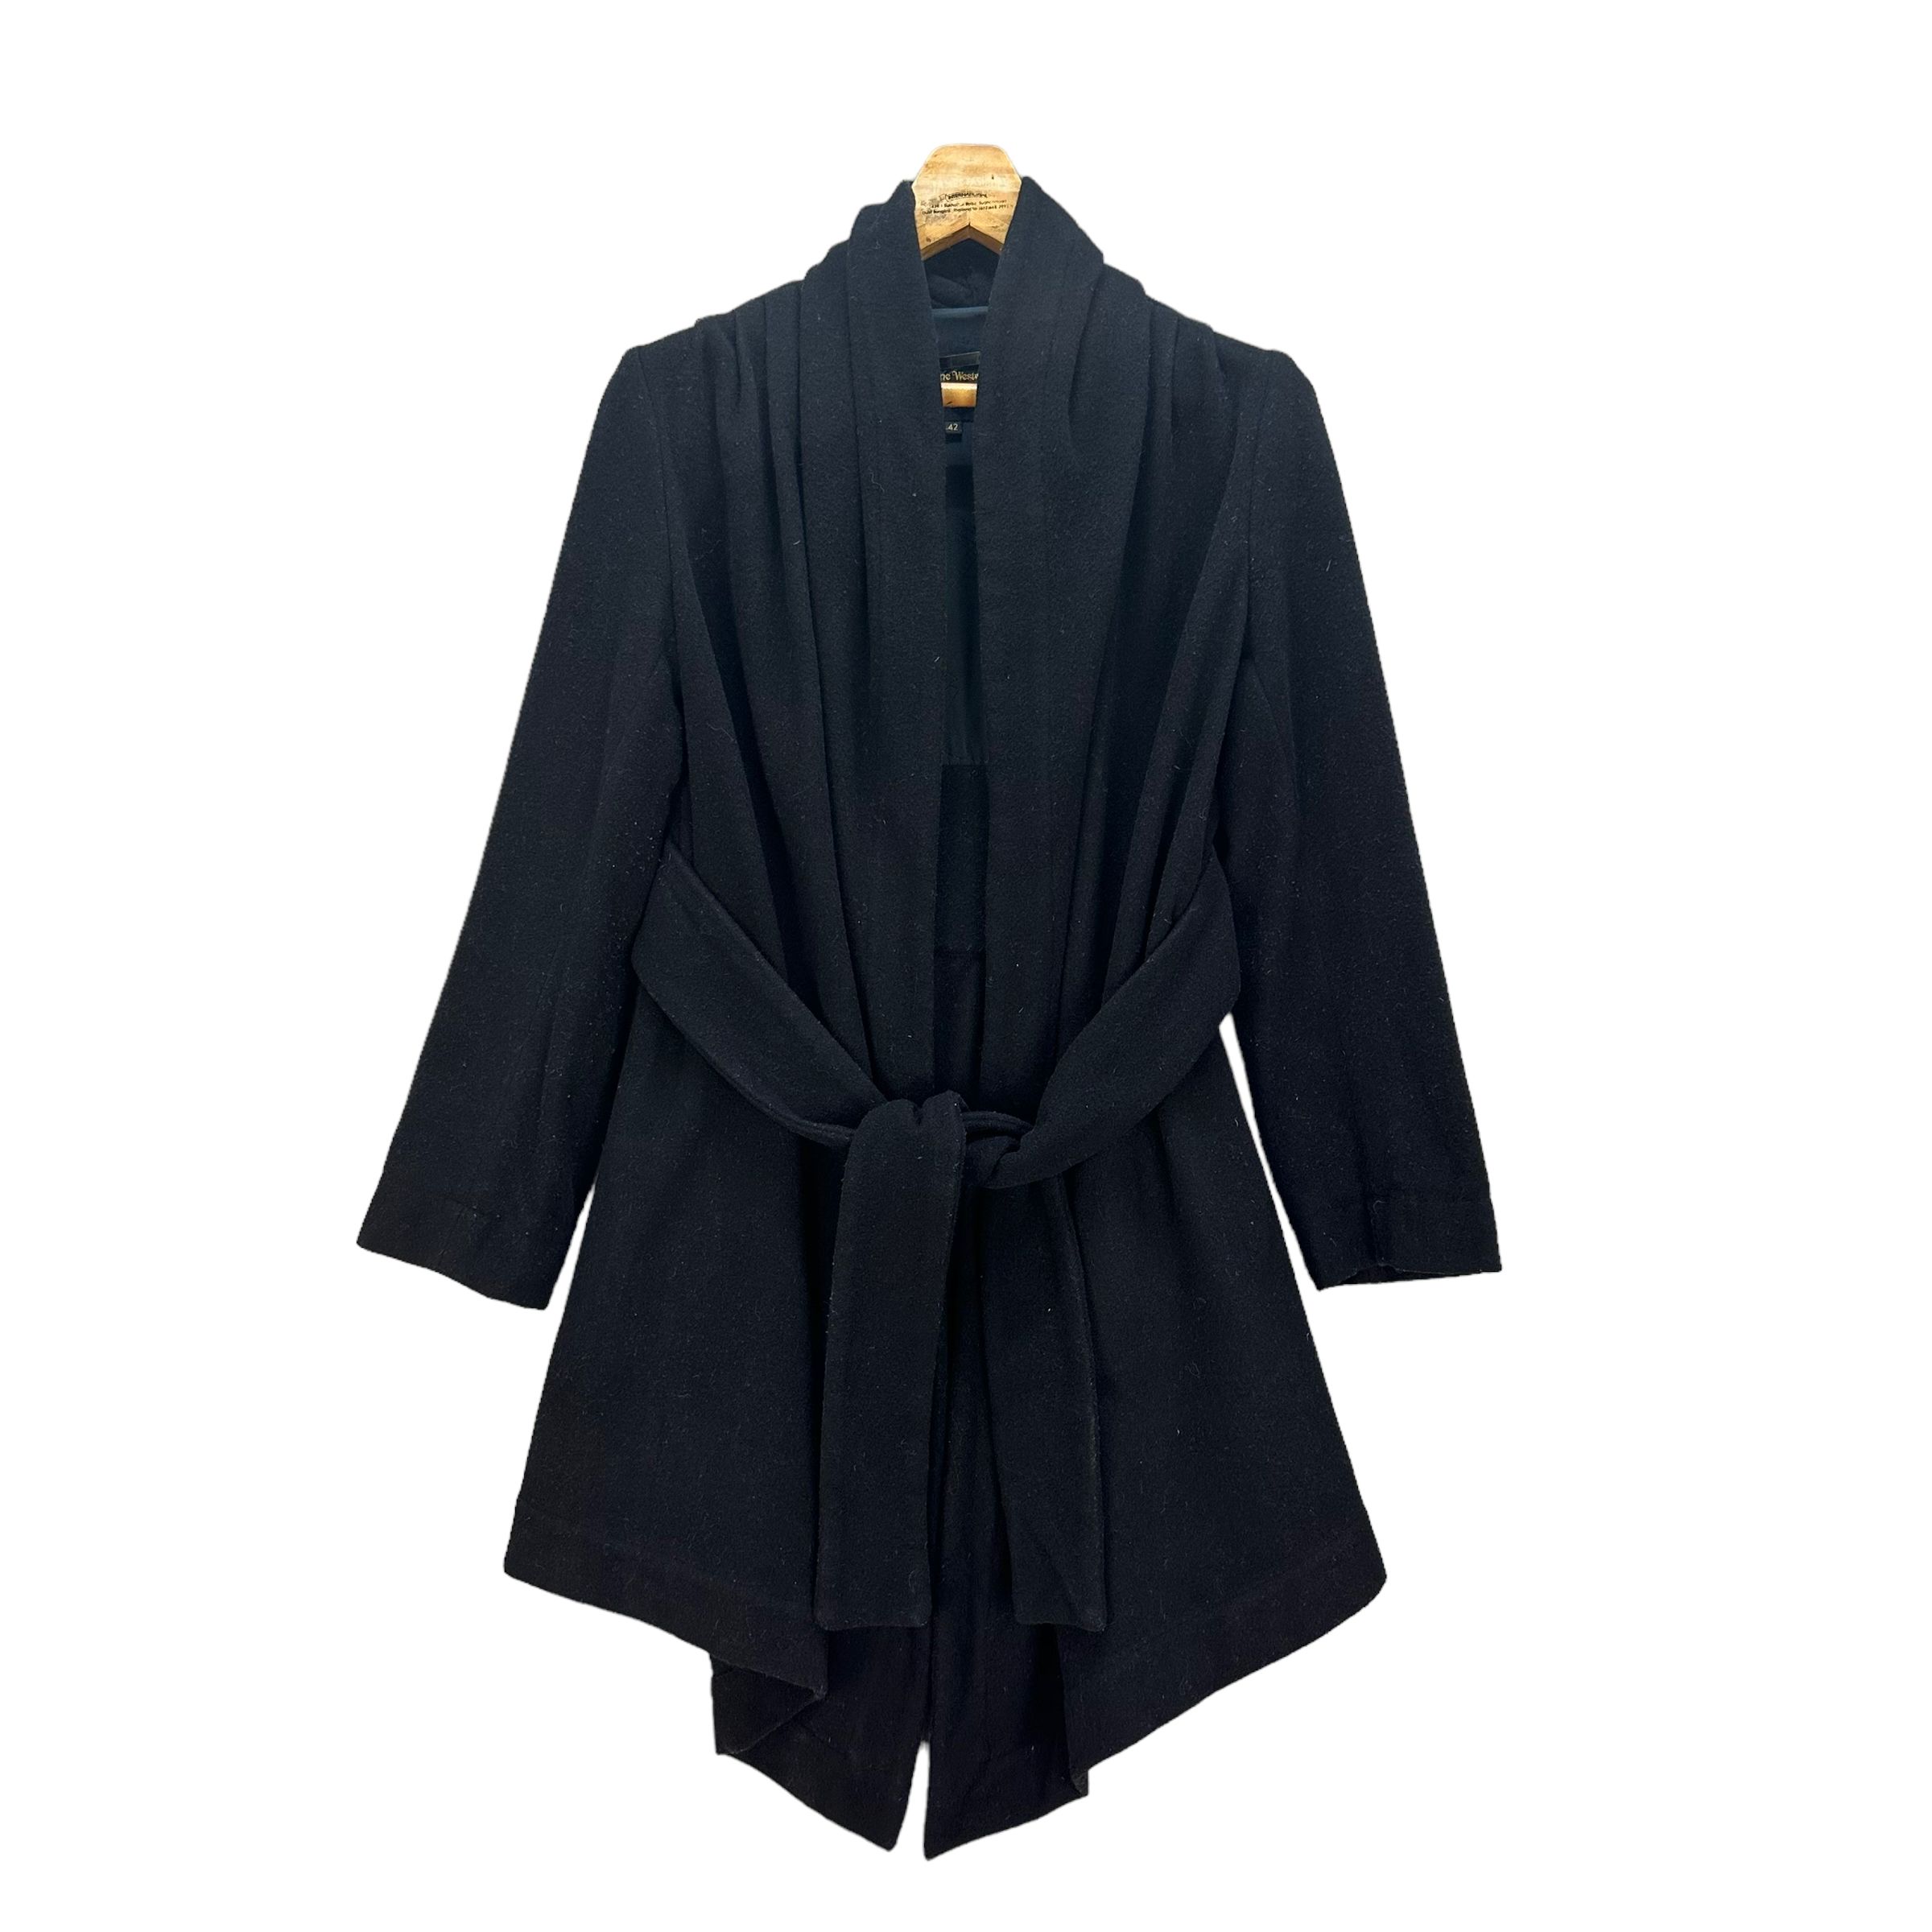 VIVIENNE WESTWOOD ANGLOMANIA BUTTONLESS BELTED COAT 8214-215 - 1